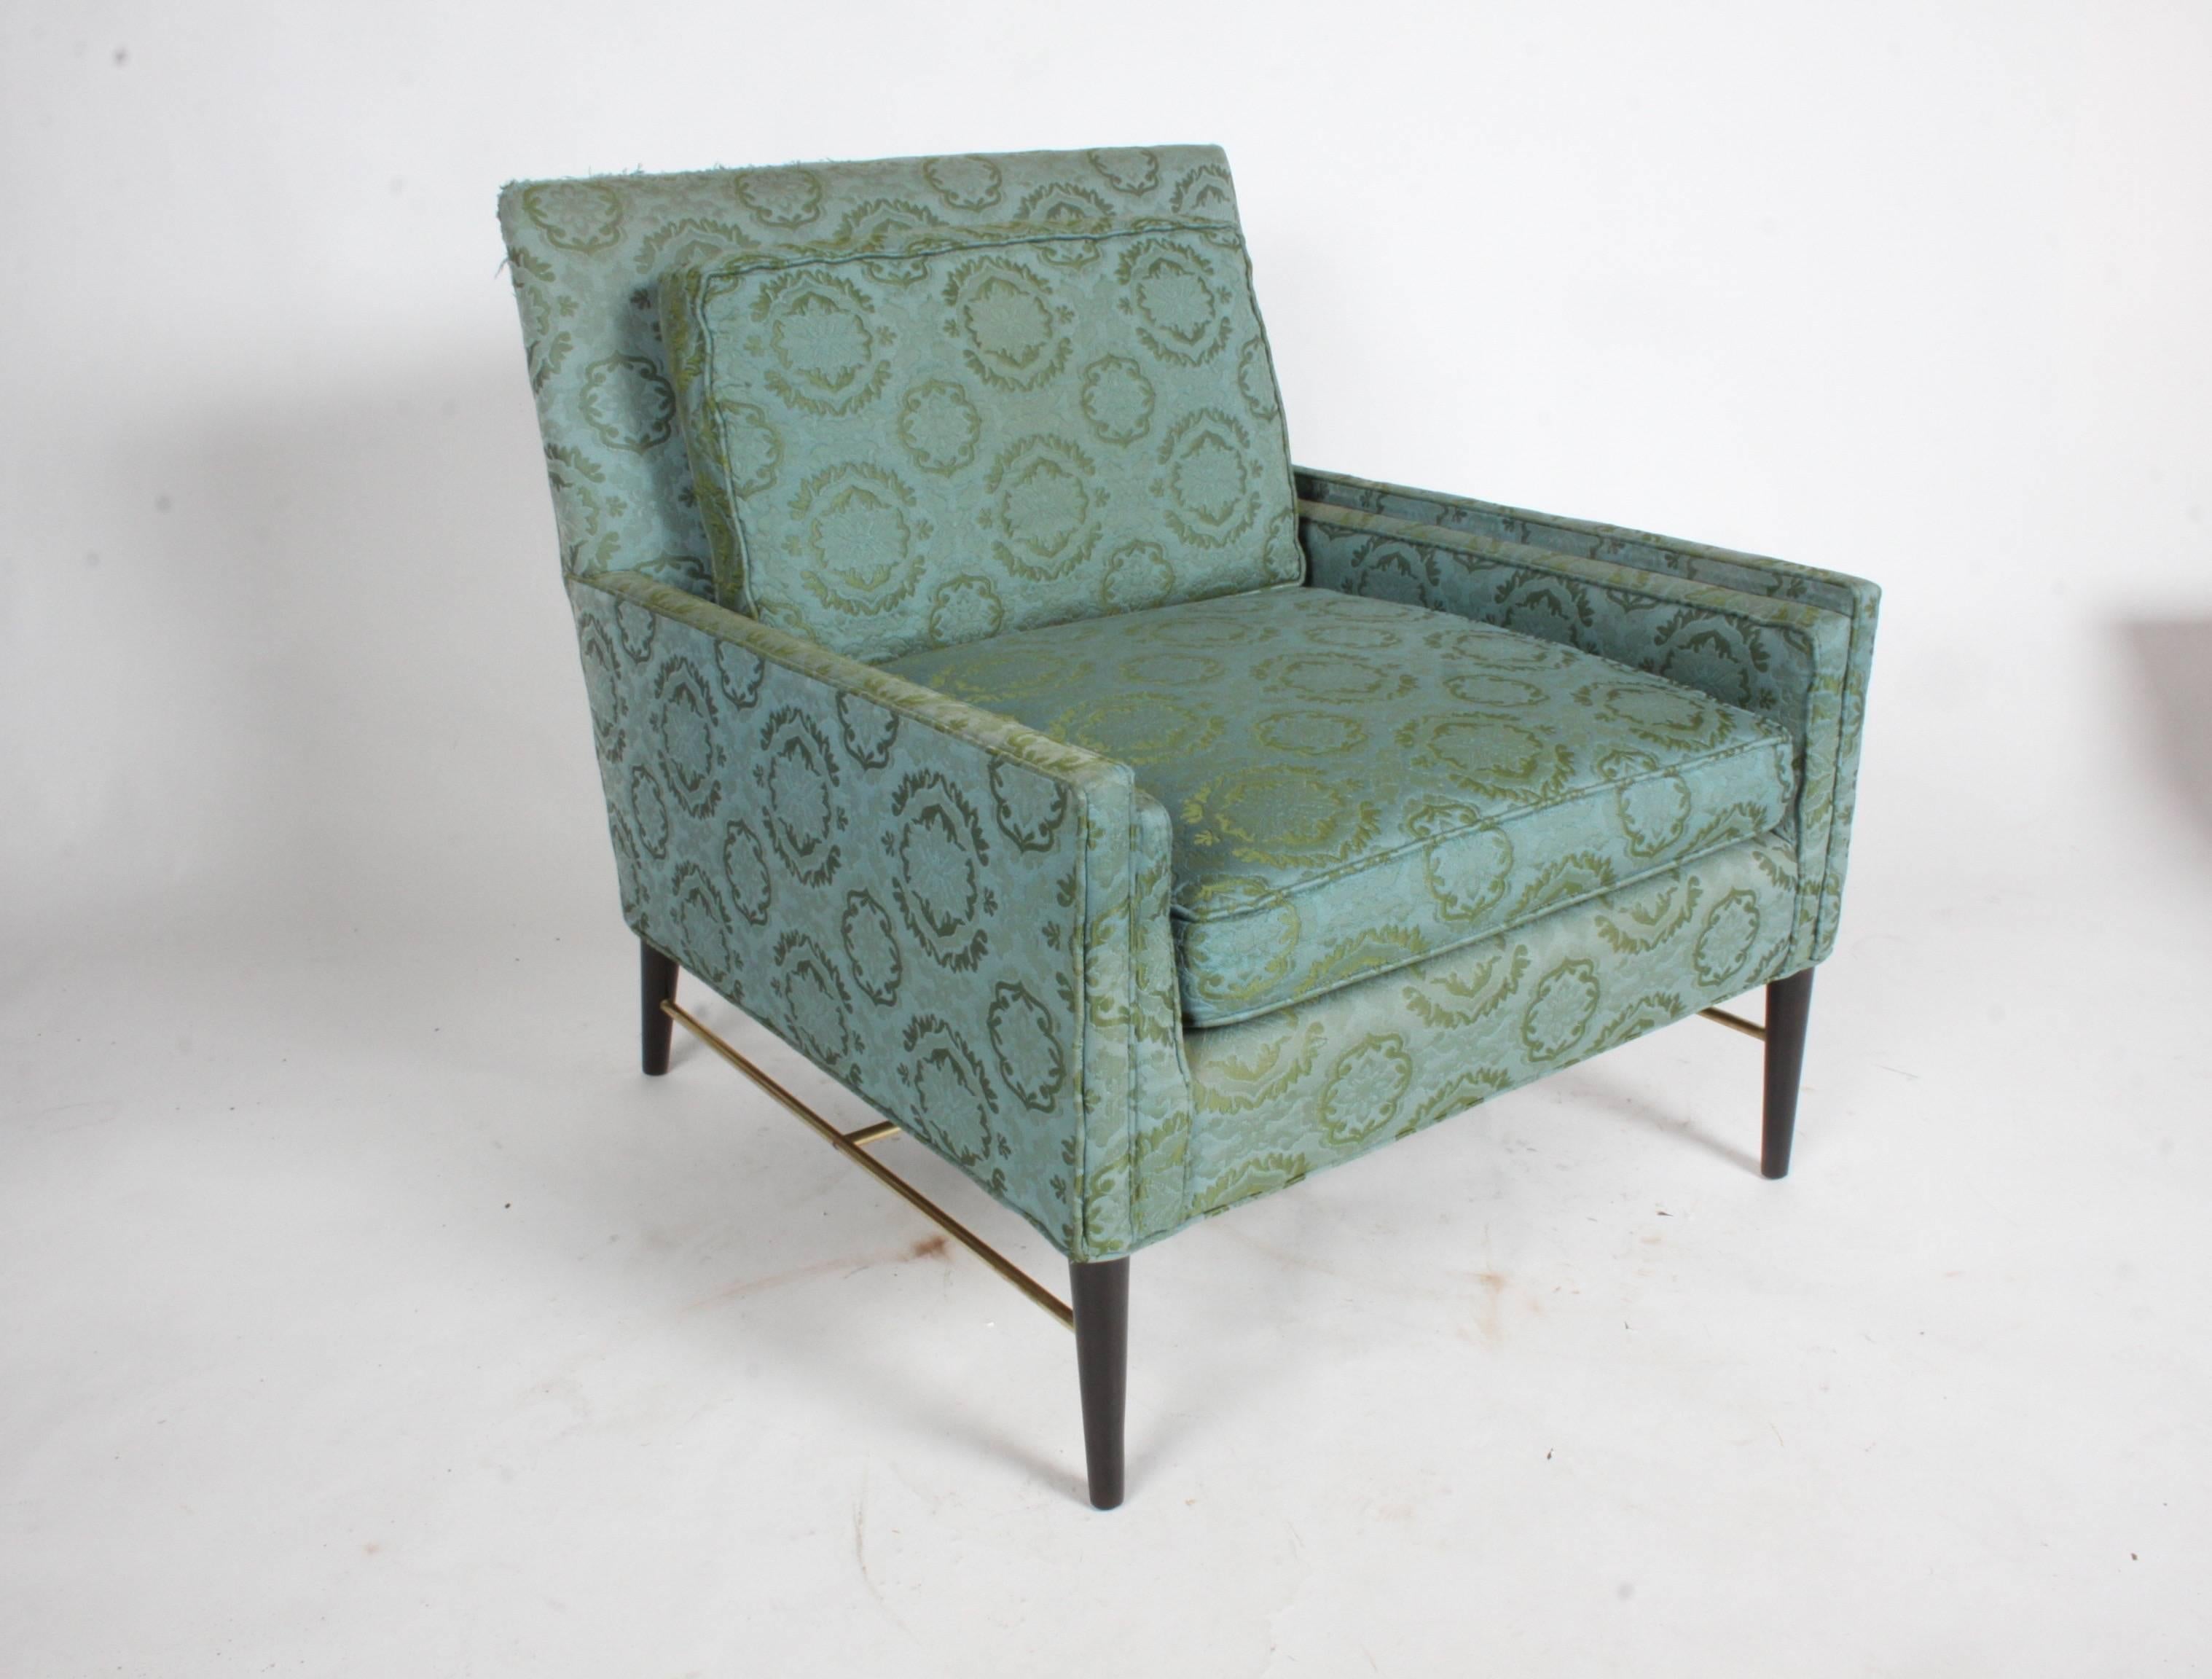 Pair of Paul McCobb for Calvin lounge or club chairs in the original fabric with brass stretchers and tapered mahogany wood legs. The brass has been polished and the legs refinished in a dark espresso finish. Upholstery and foam are original, shows